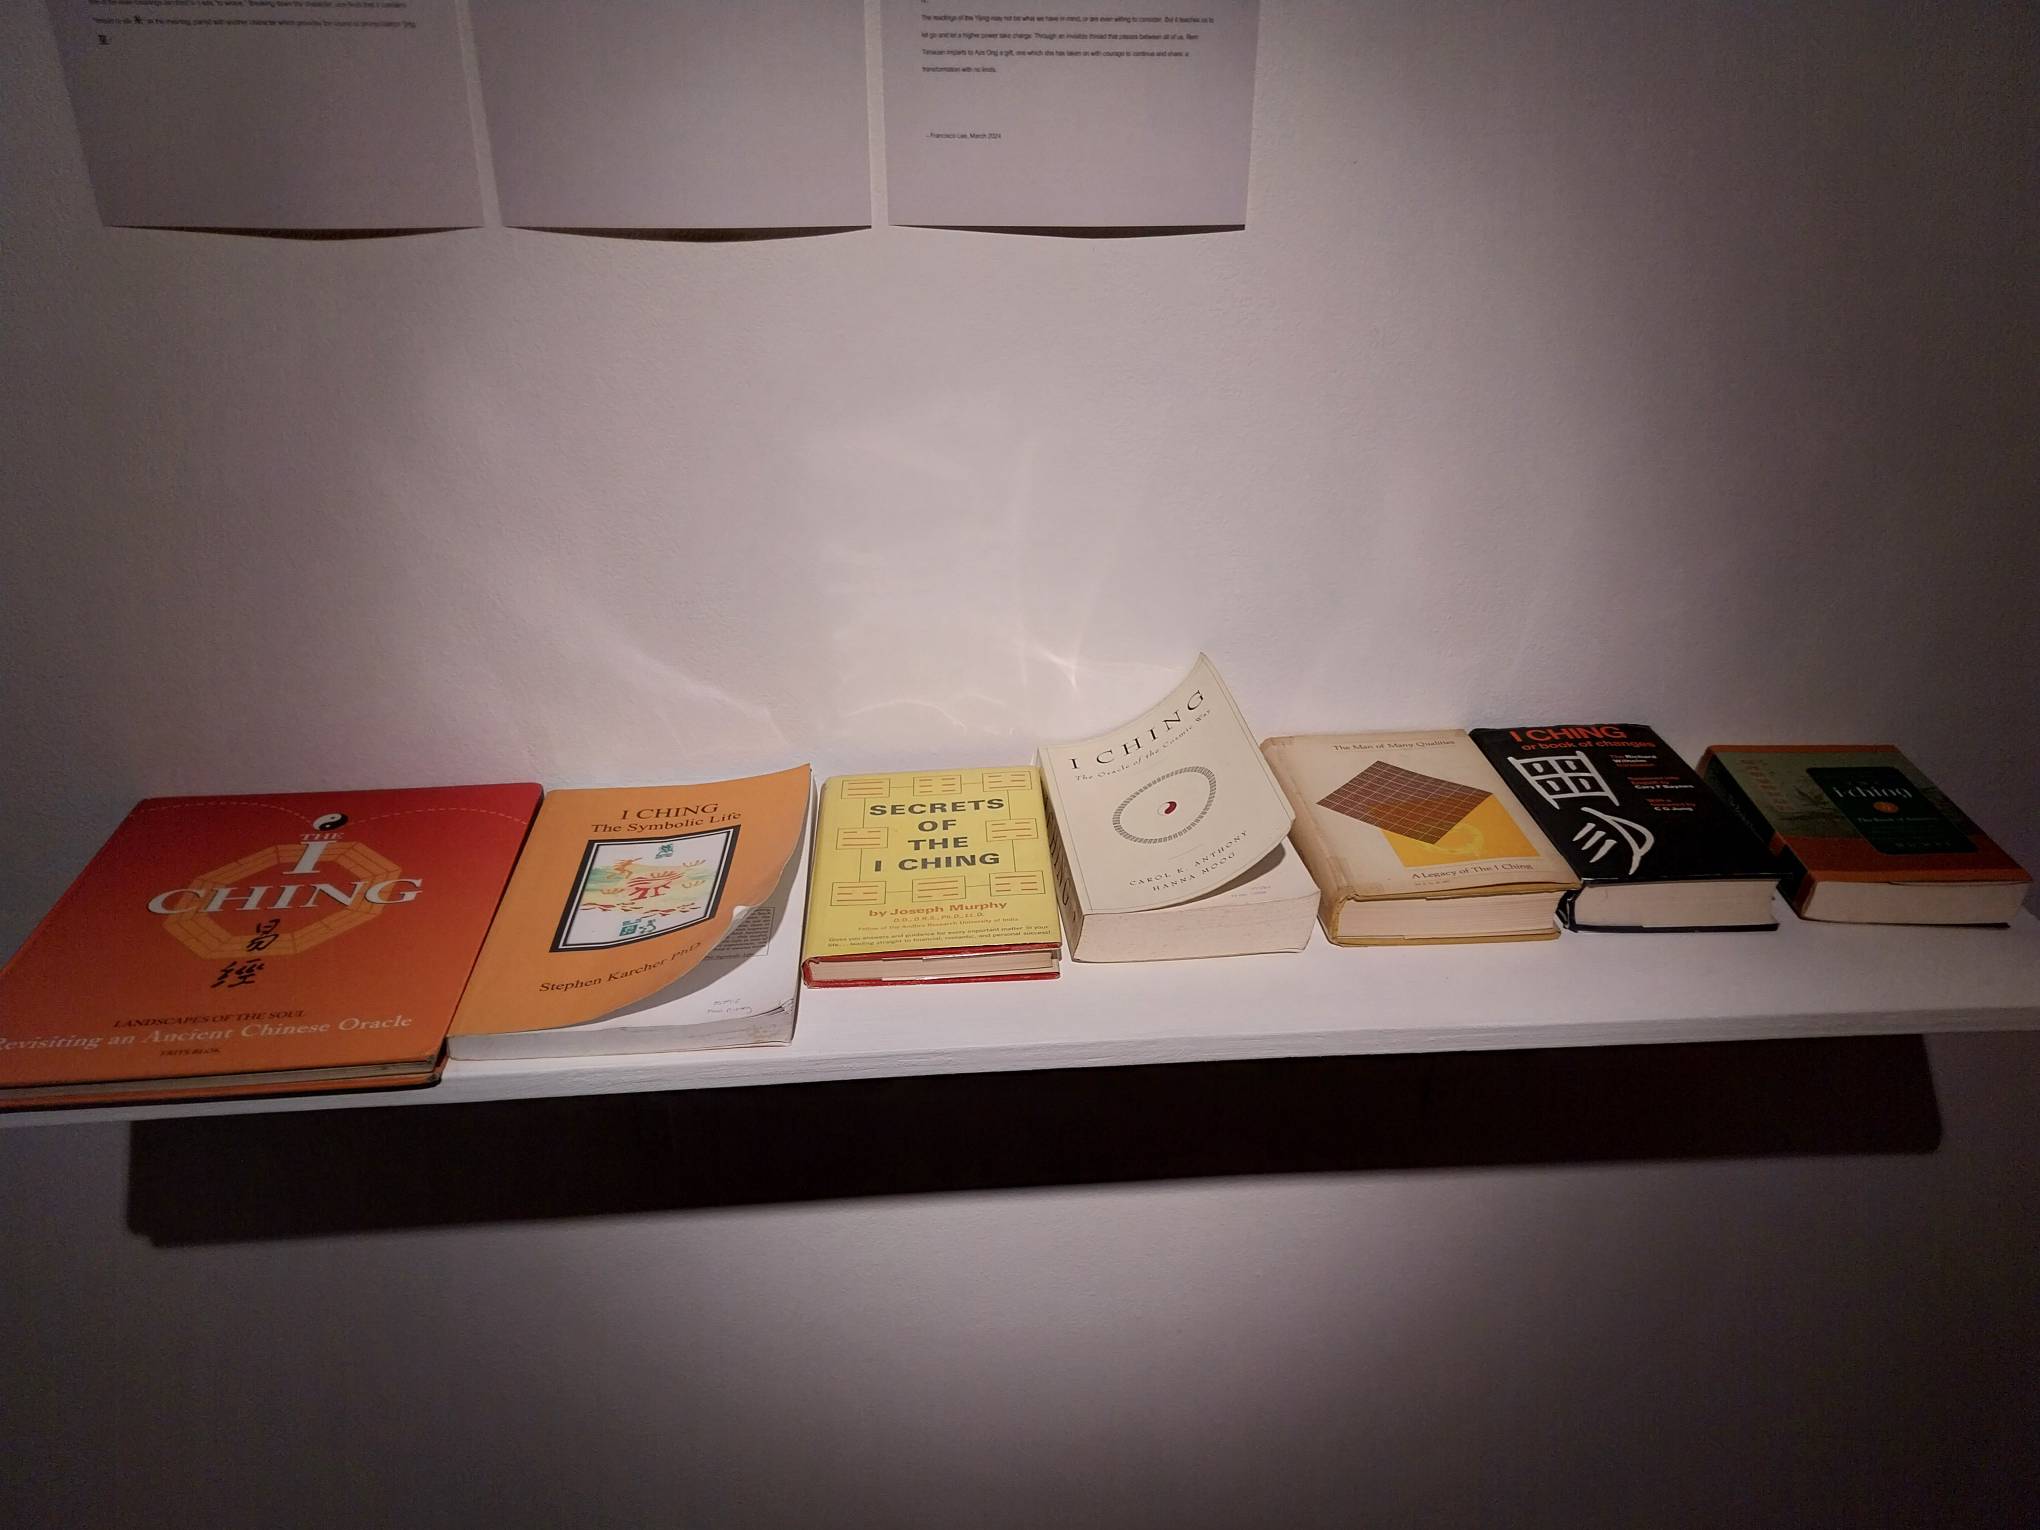 Books on I Ching being exhibited at Gravity Art Space. Photo by Elle Yap.